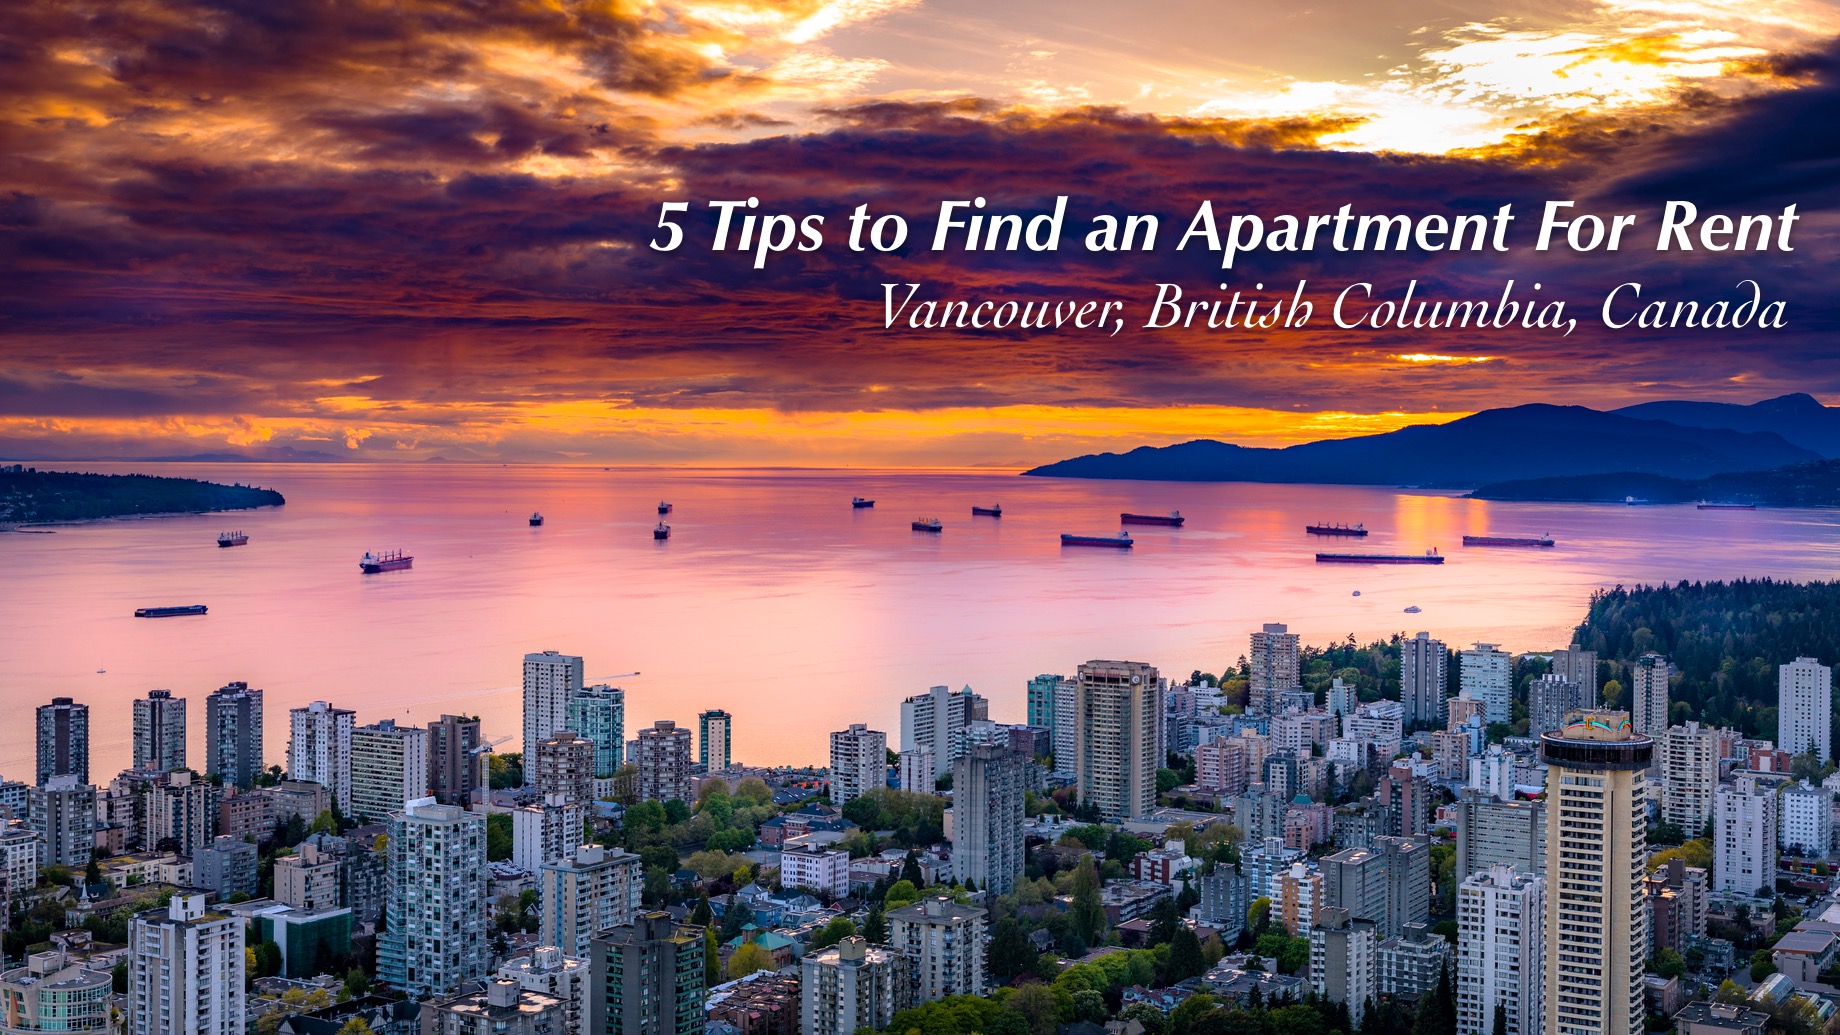 5 Tips to Find an Apartment For Rent in Vancouver, British Columbia, Canada